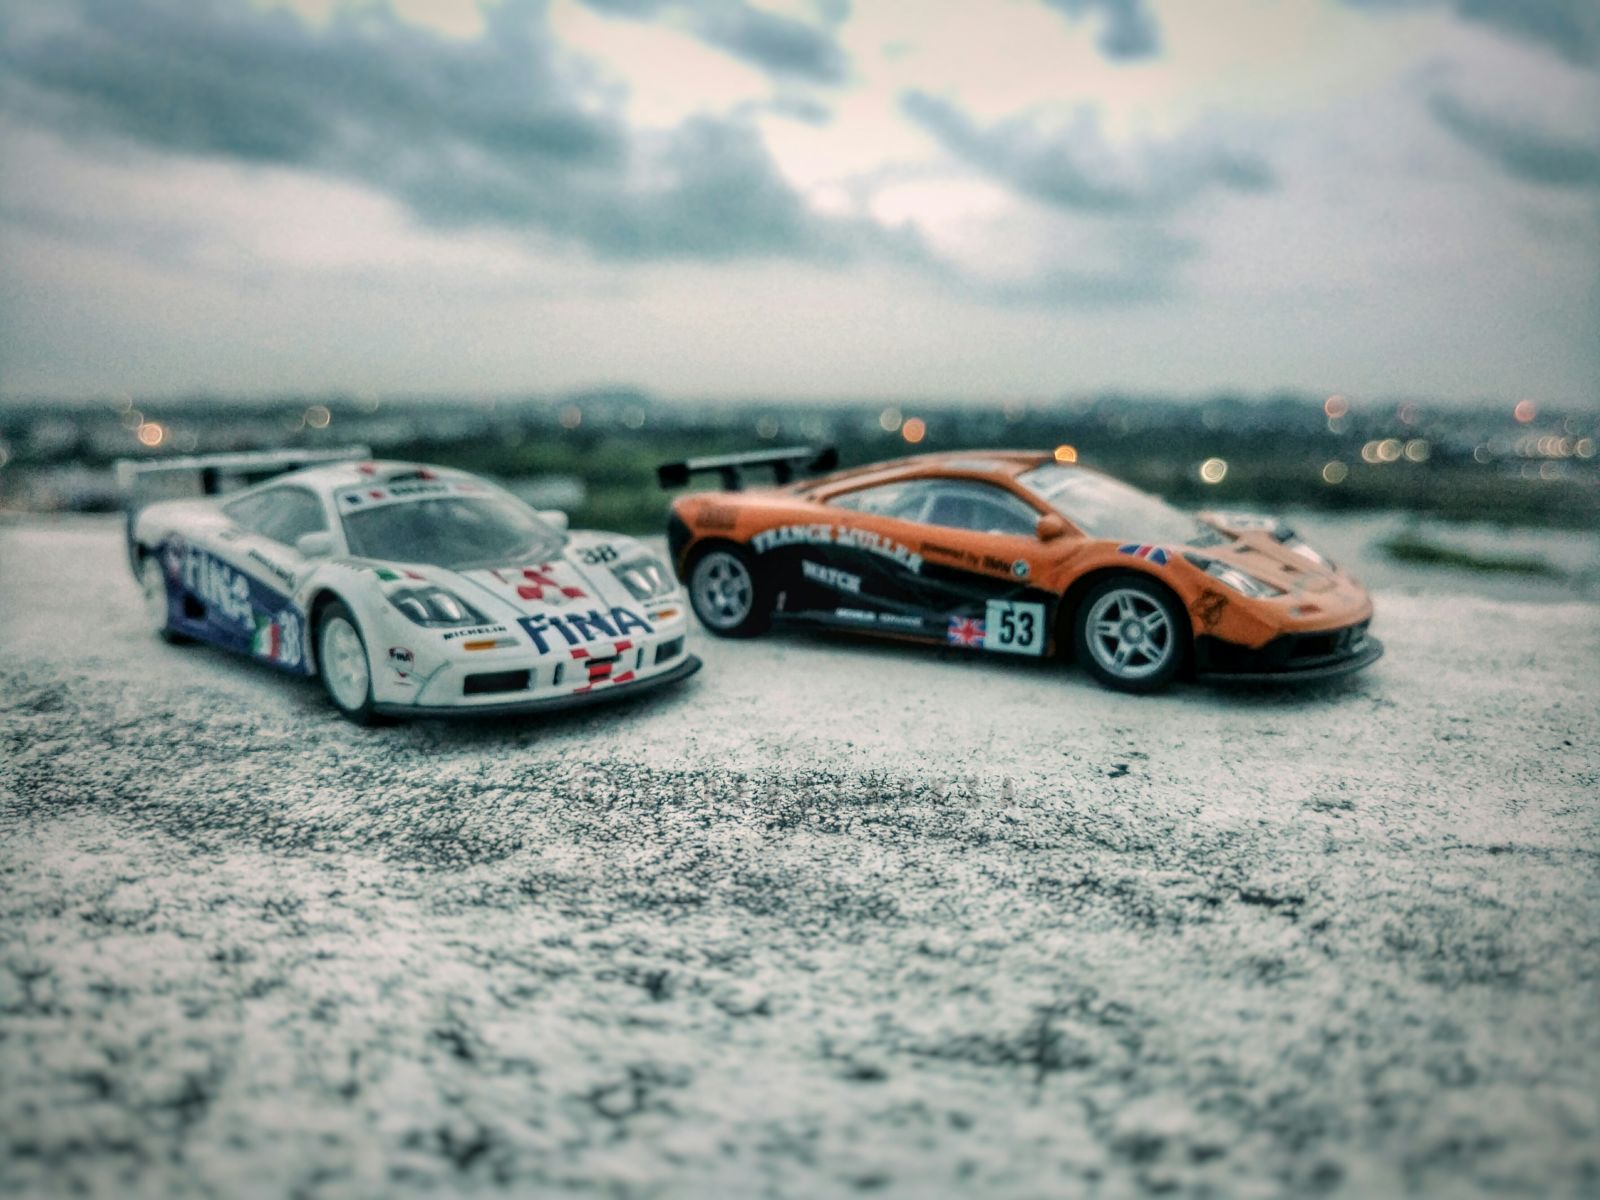 (L) the Team Bigazzi FINA #38 and (R) The Franck Muller Watch #53, both 1/43 models of the 1996 McLaren F1-GTR